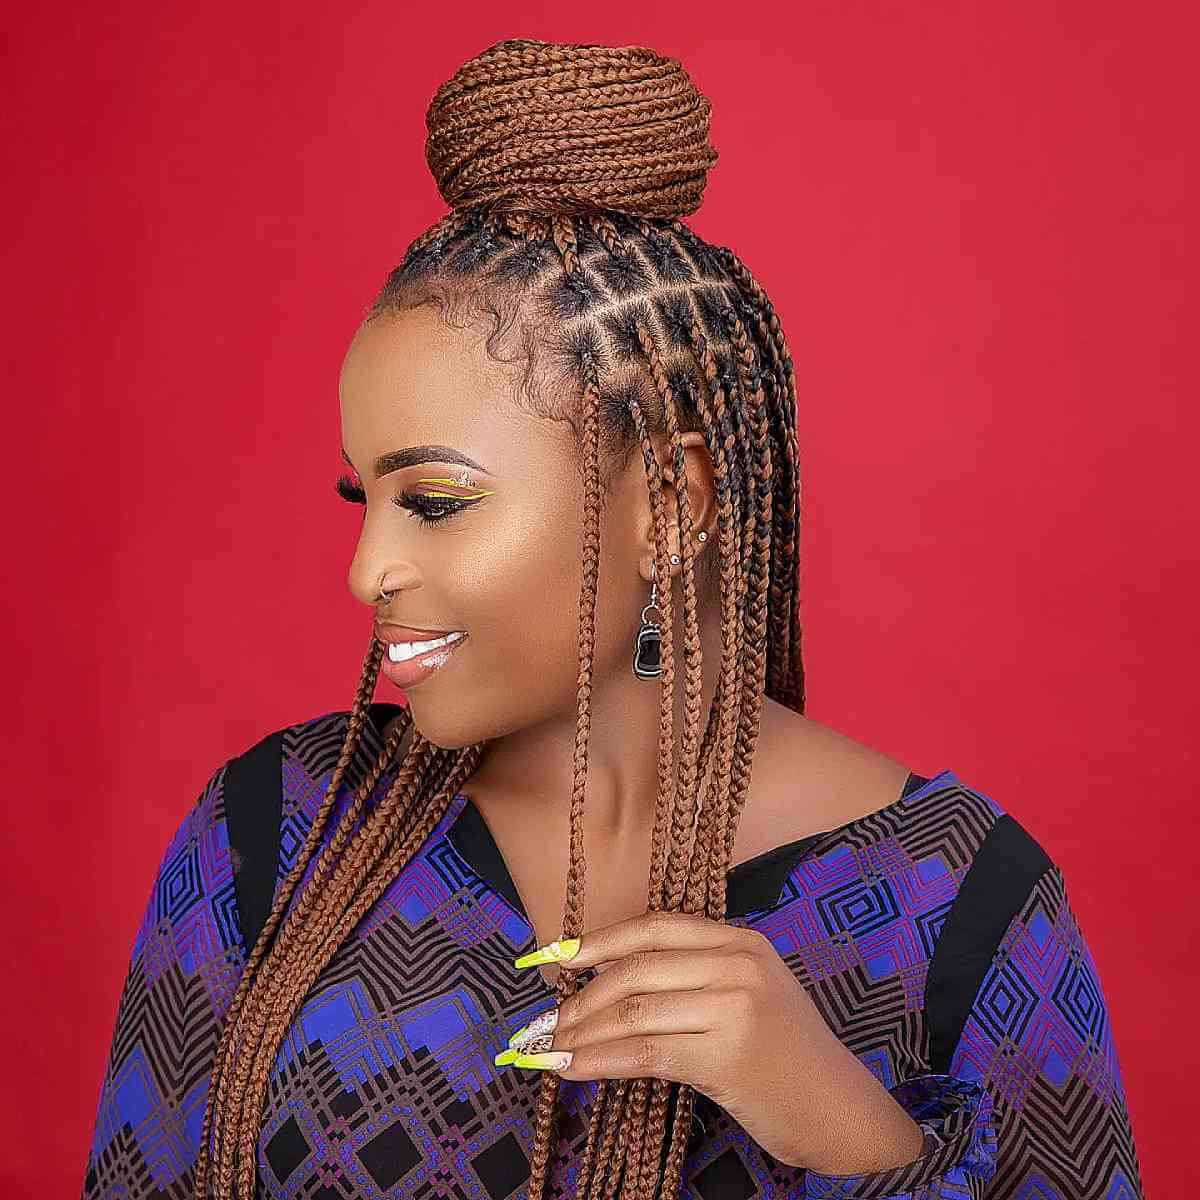 Get the Look with These Hot African Hair Styles | Inecto